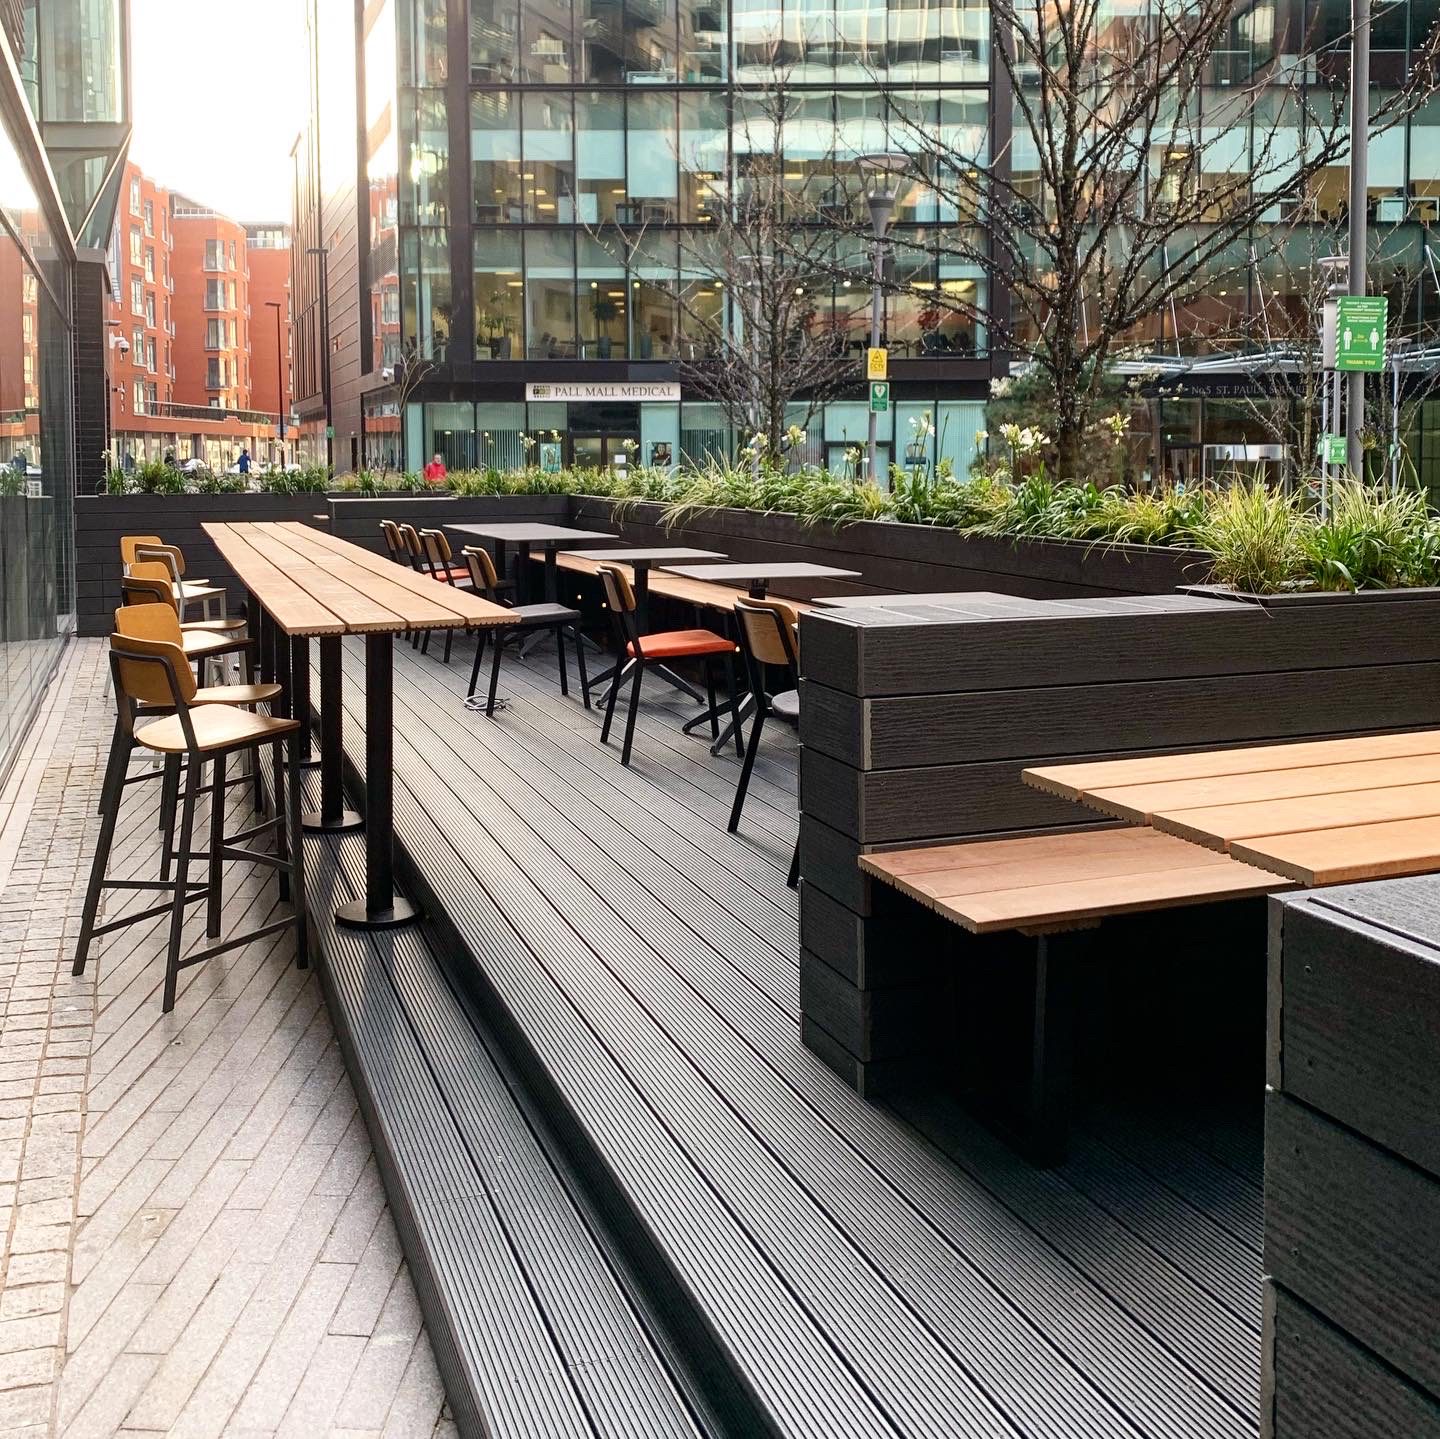 Composite decking being used in front of a cafe